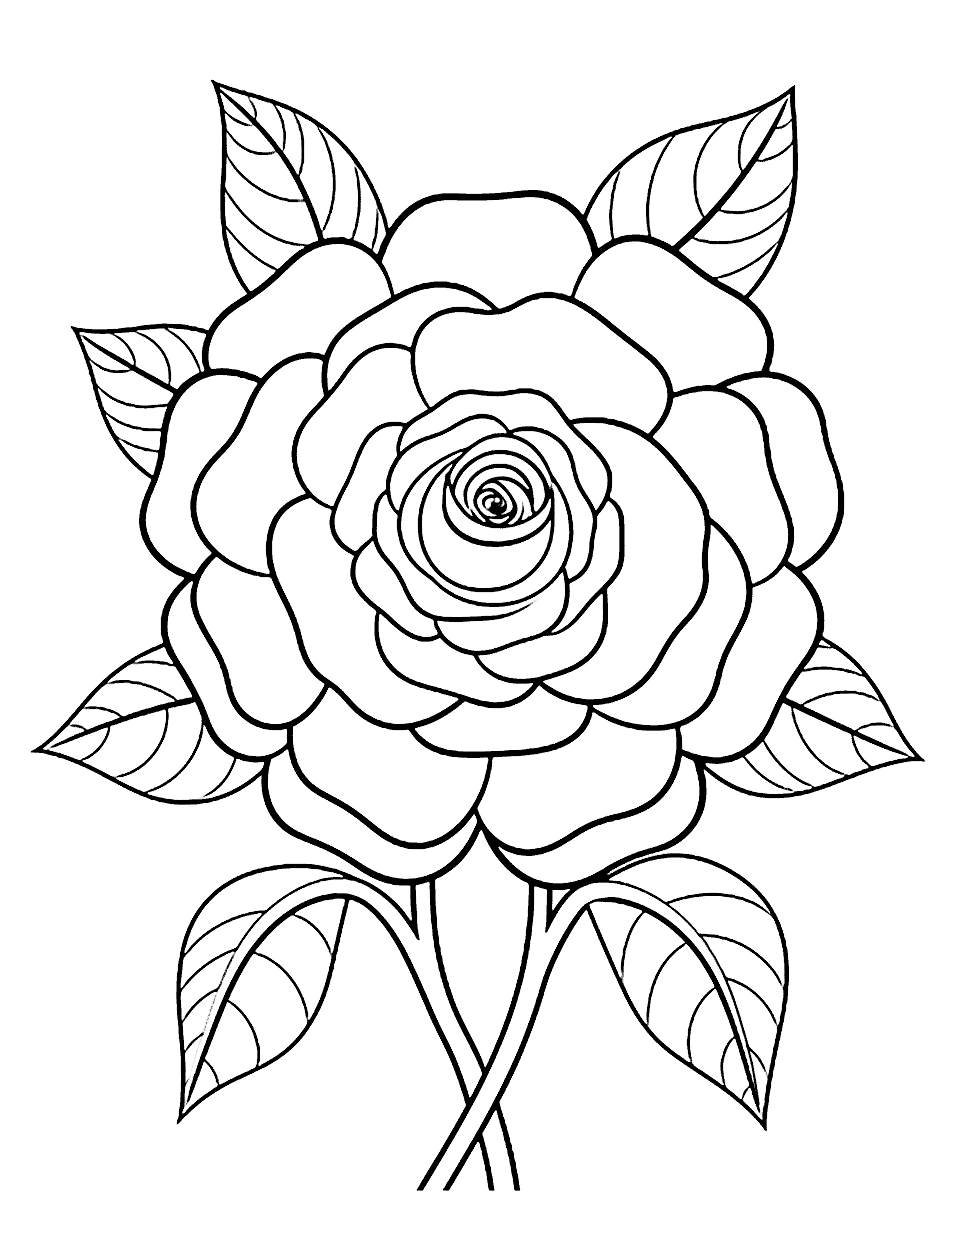 Rose Mandala for Stress Relief Flower Coloring Page - A detailed mandala with rose motifs for relaxation.